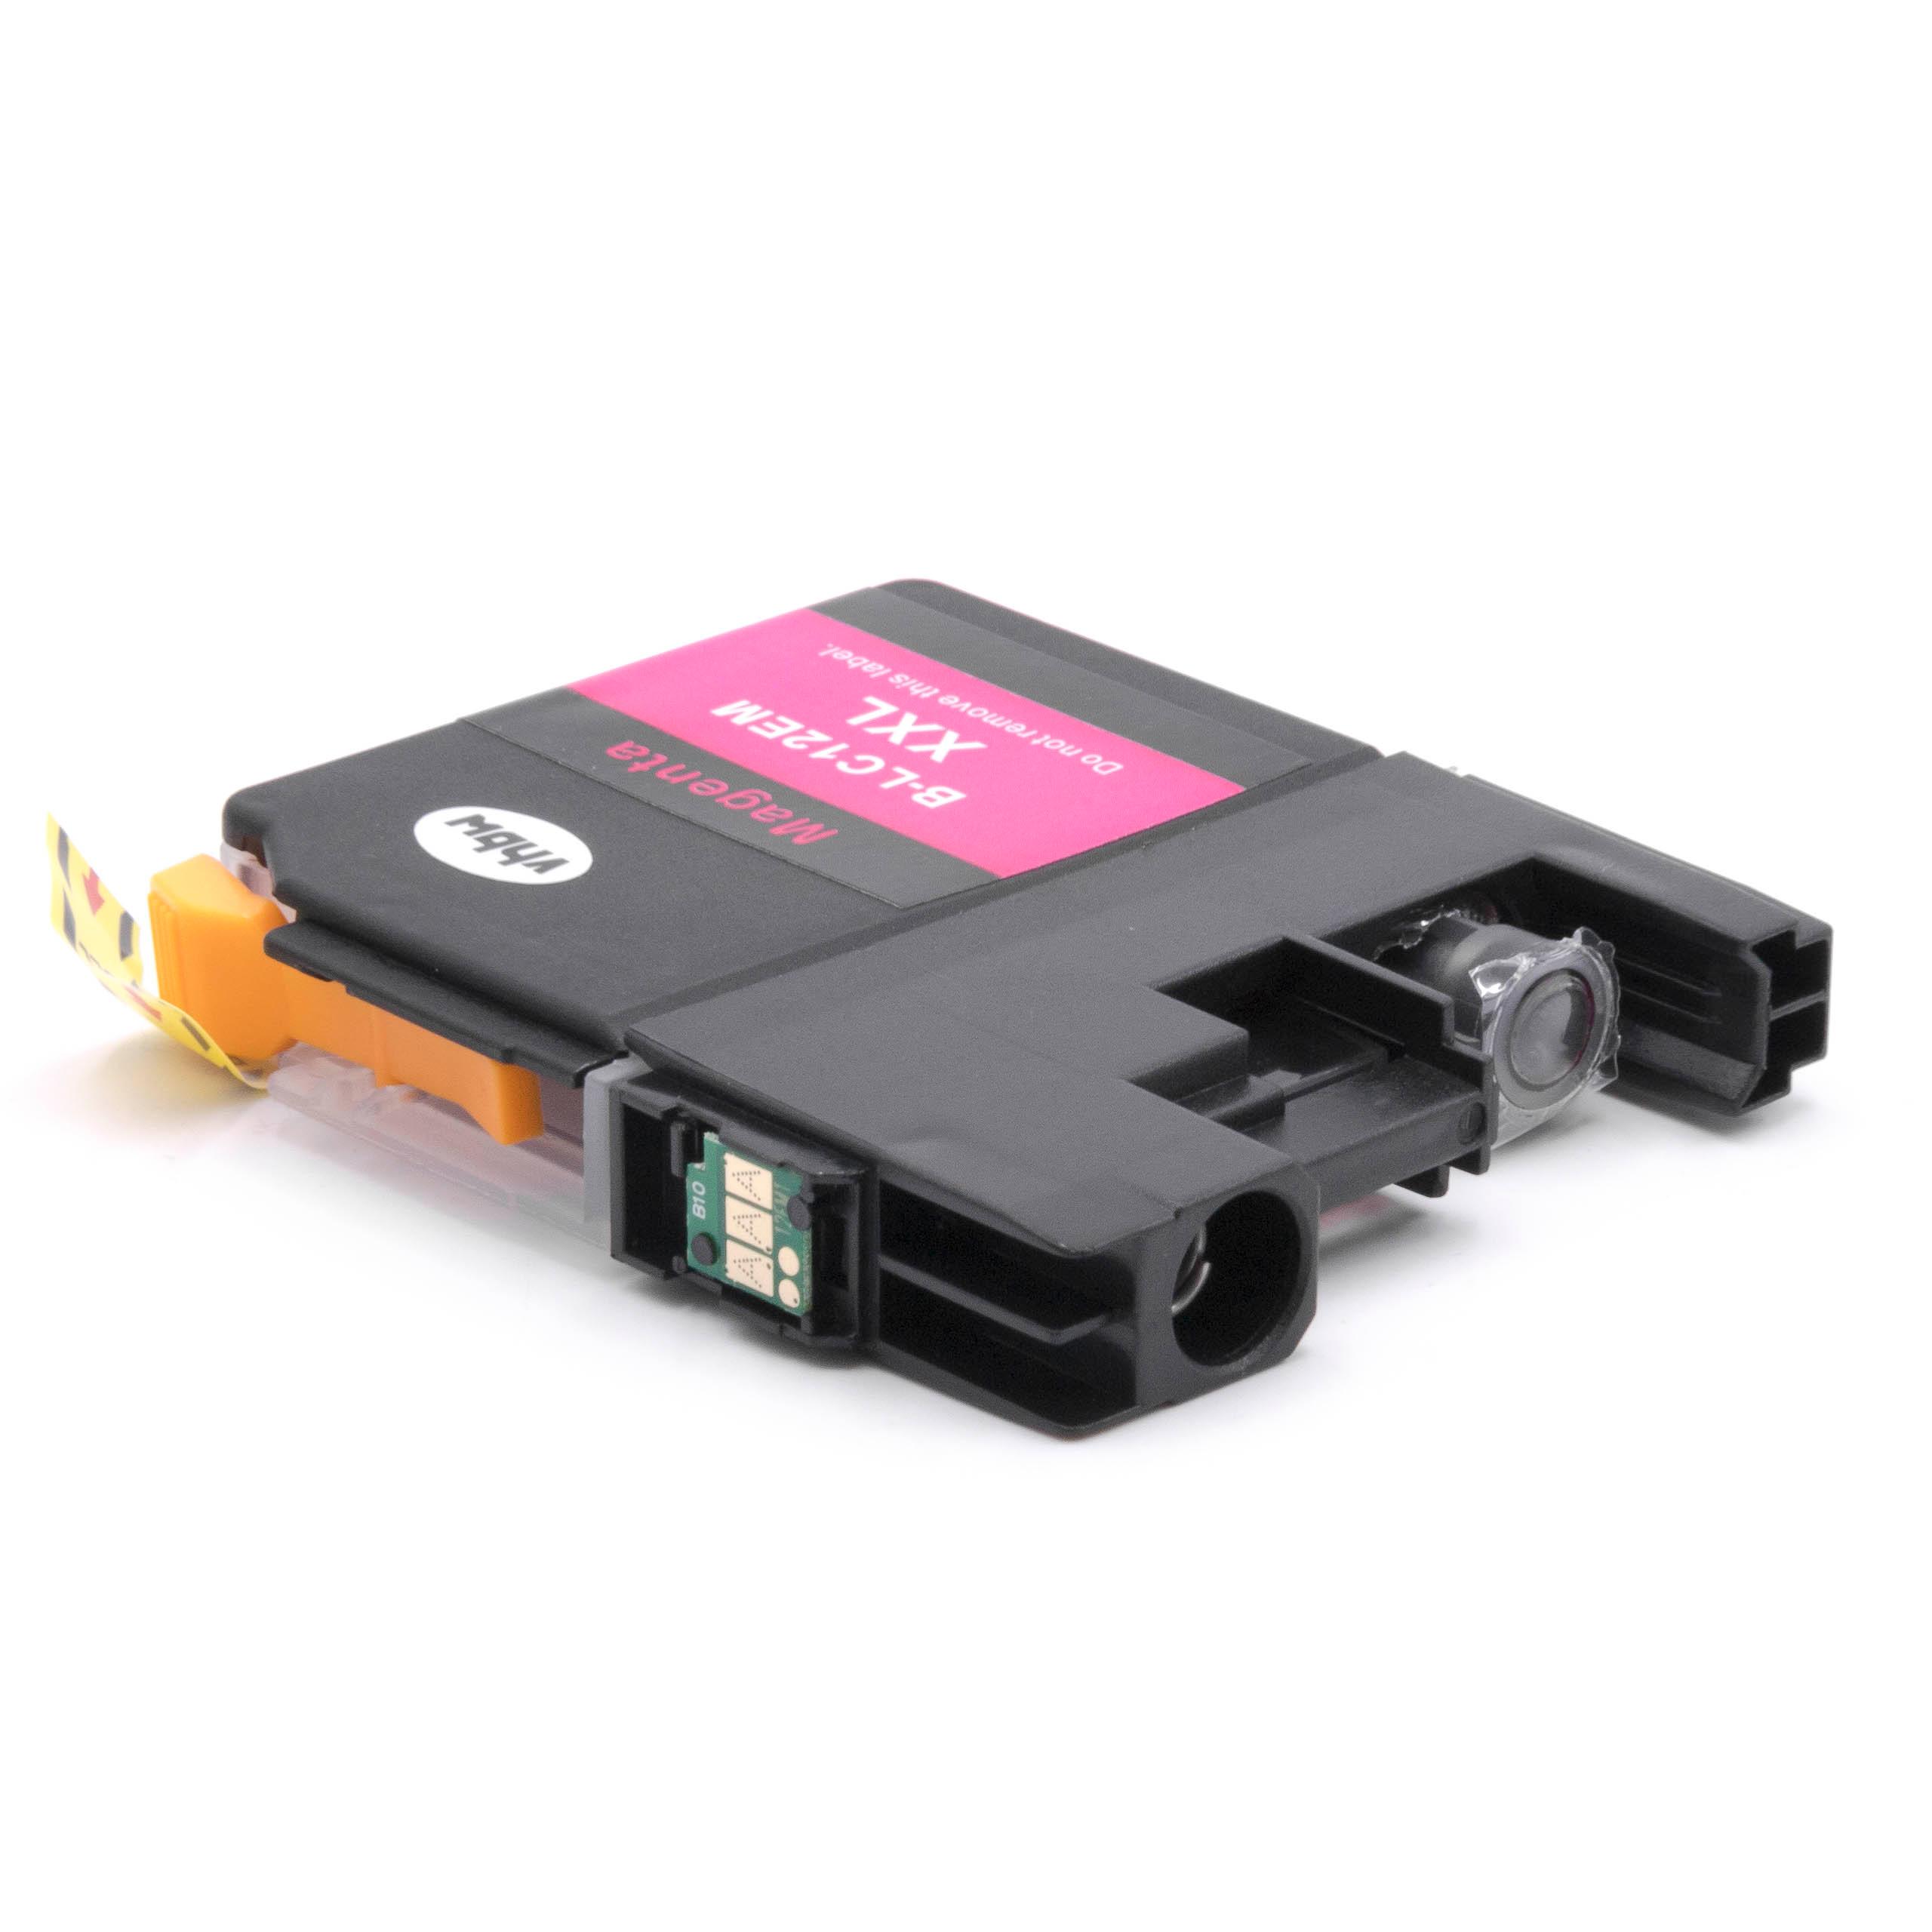 Ink Cartridge as Exchange for Brother LC-12EM, LC12EM, LC-12E M for Brother Printer - Magenta 15 ml + Chip